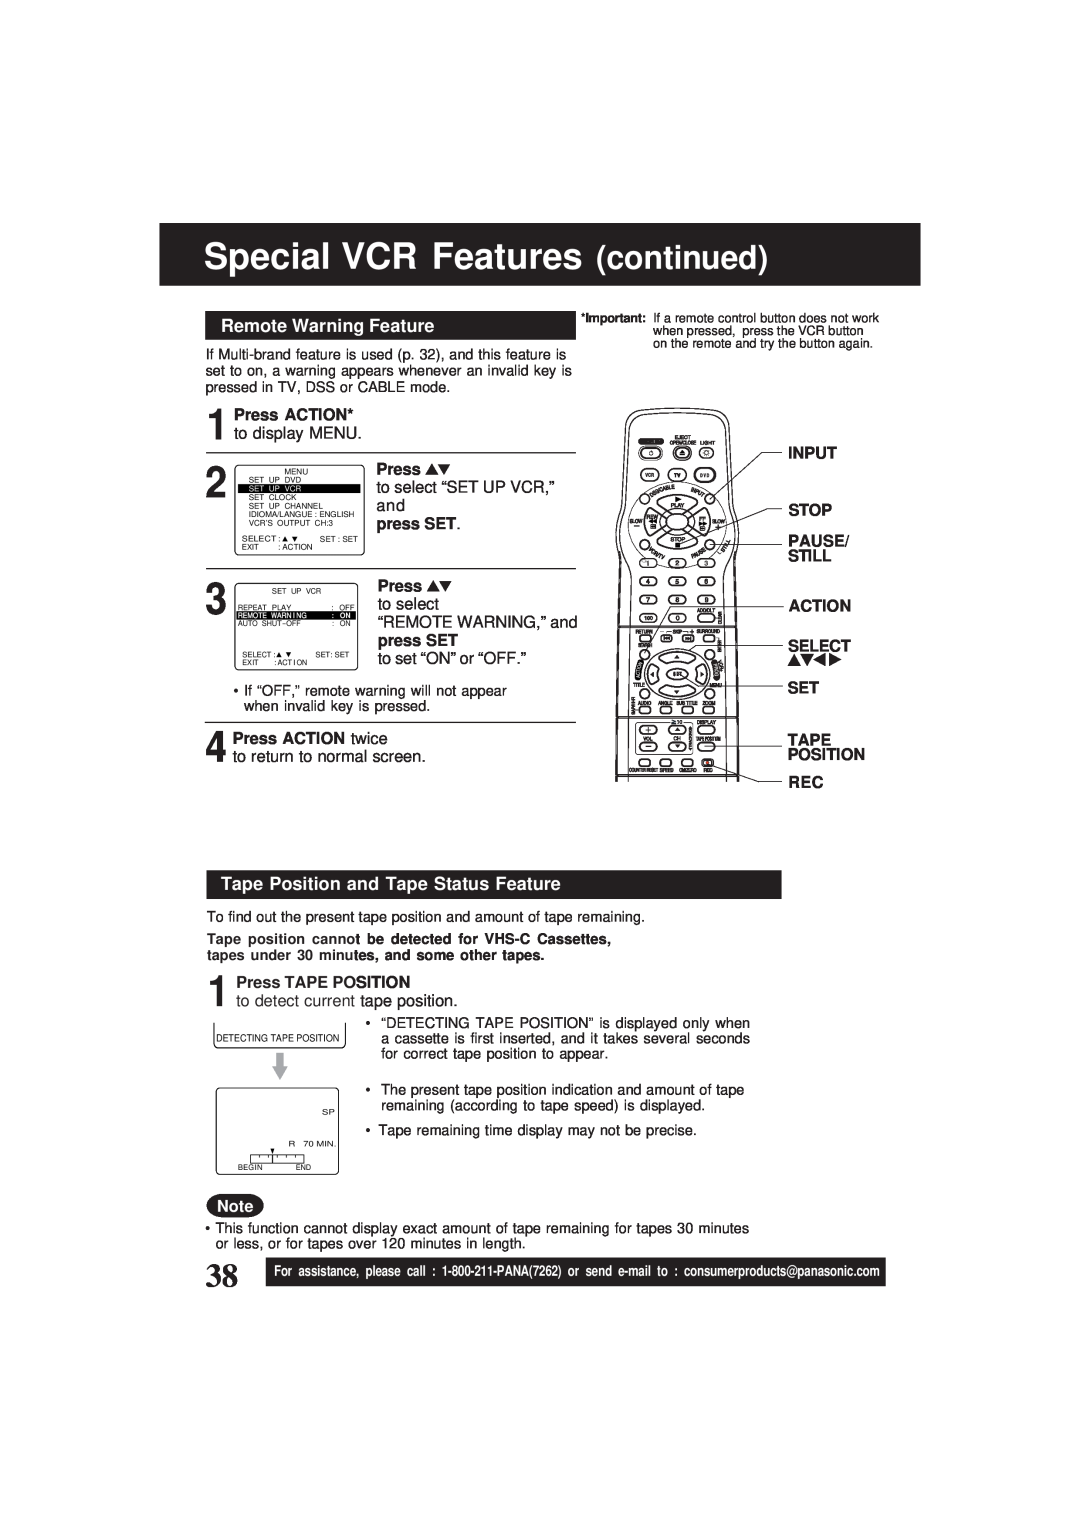 Panasonic PV-D4761 Special VCR Features continued, Tape Position and Tape Status Feature, Press ACTION, to display MENU 